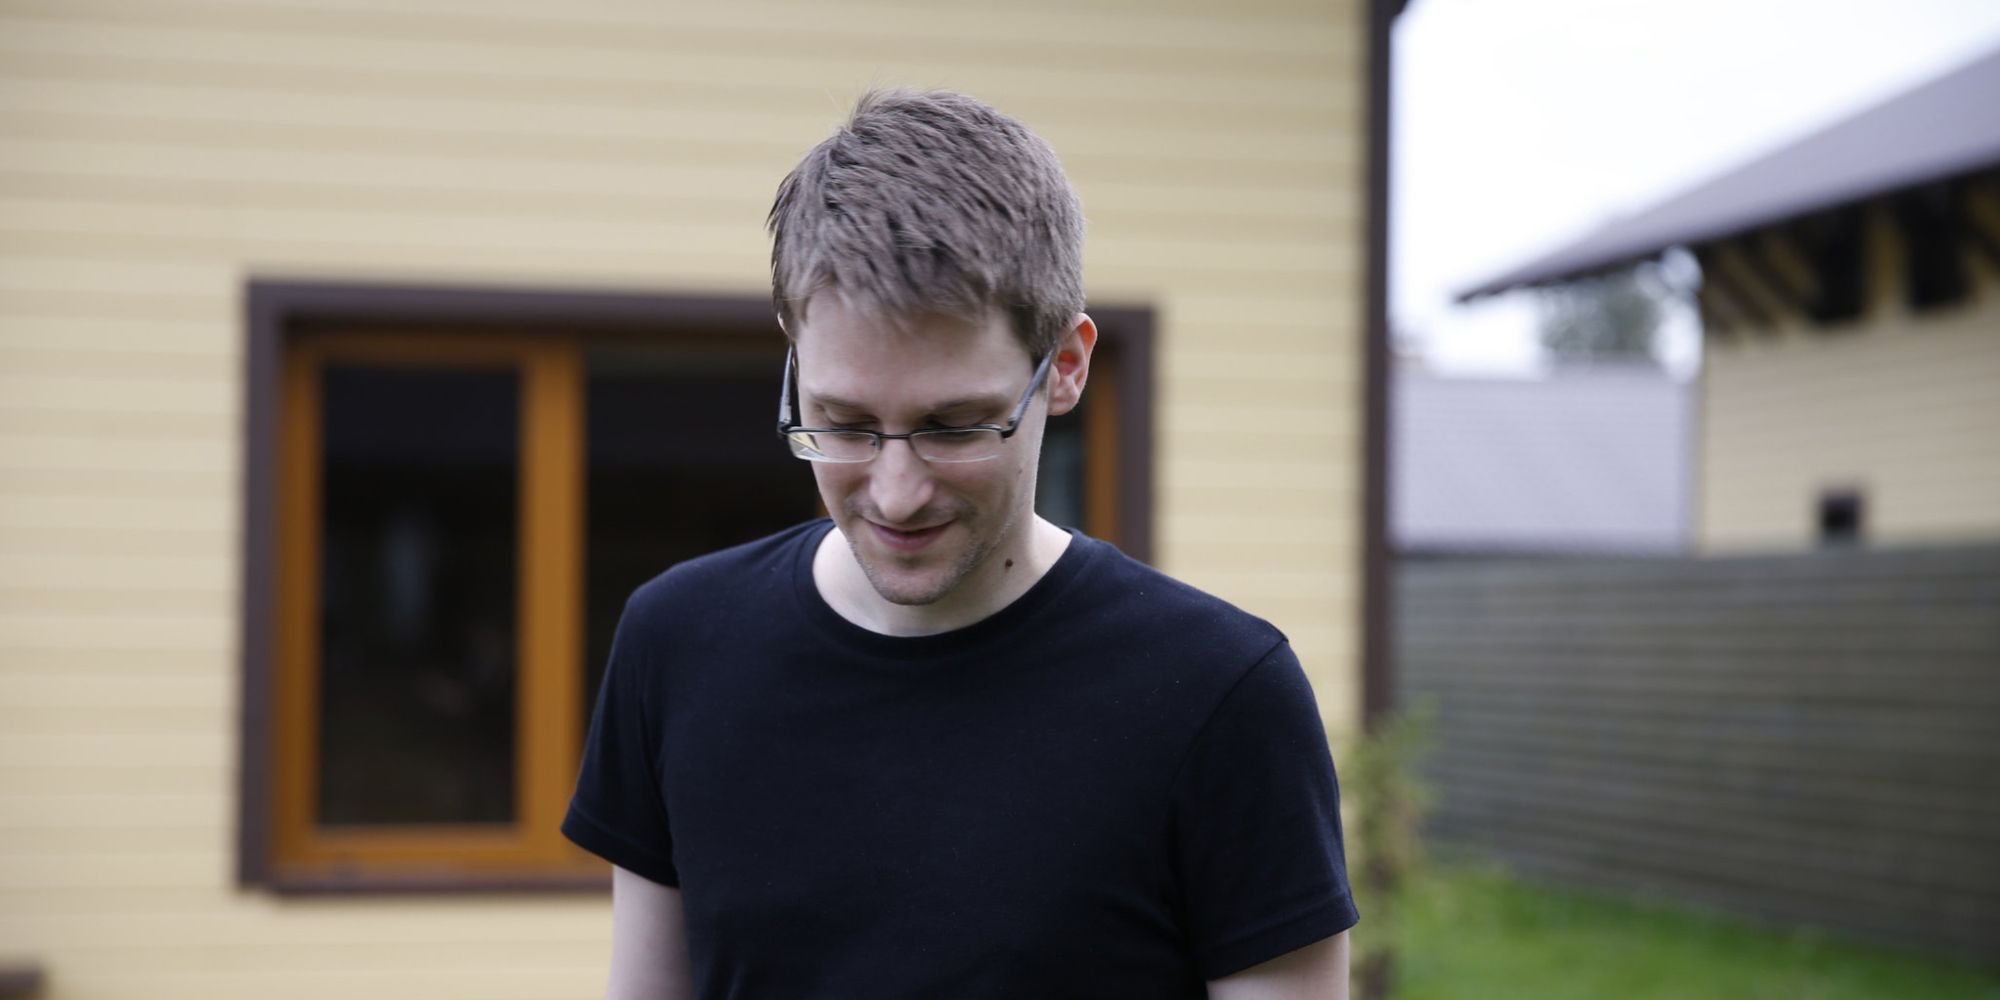 (photo) image of a white man with glasses standing in a back garden